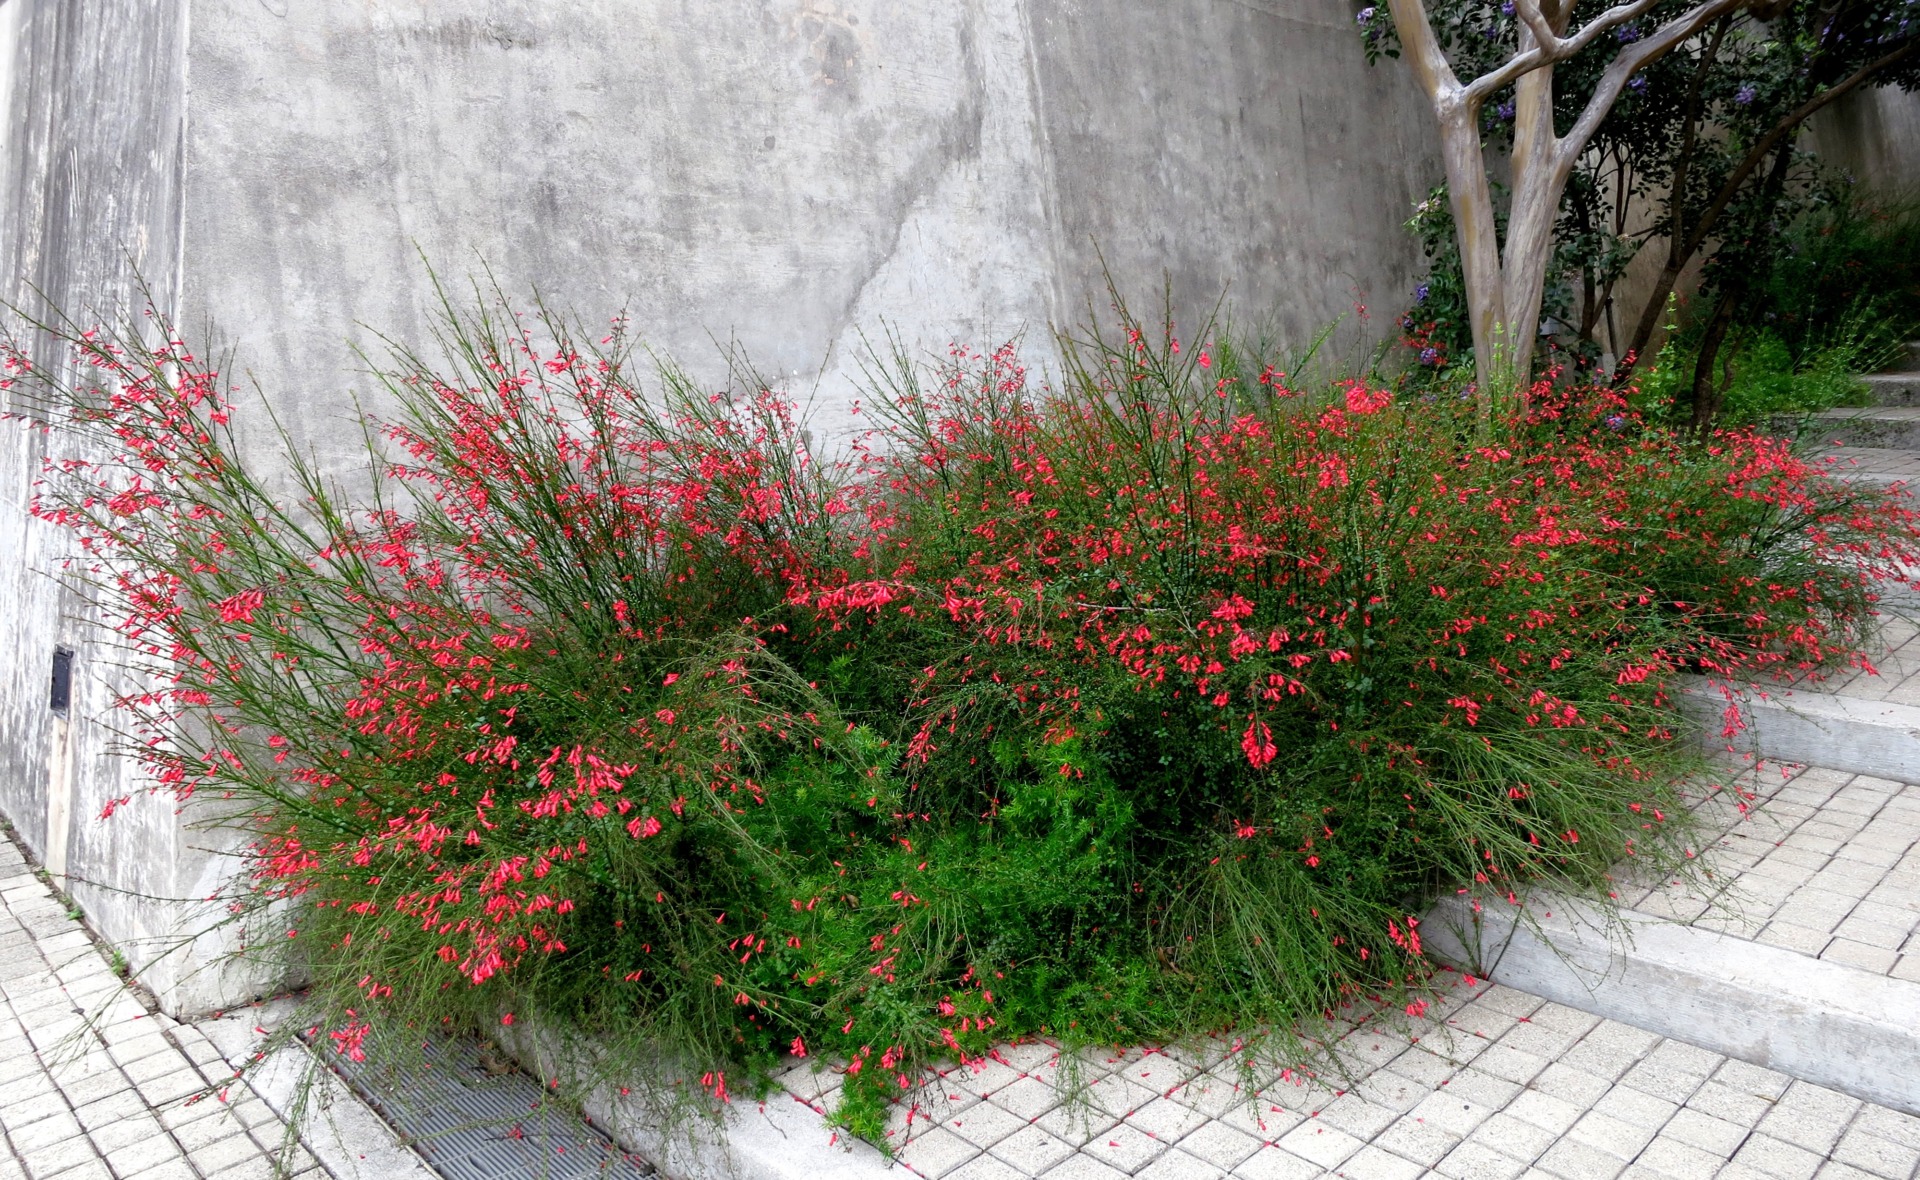 Ignite gardens with newest Texas Superstar – the firecracker plant